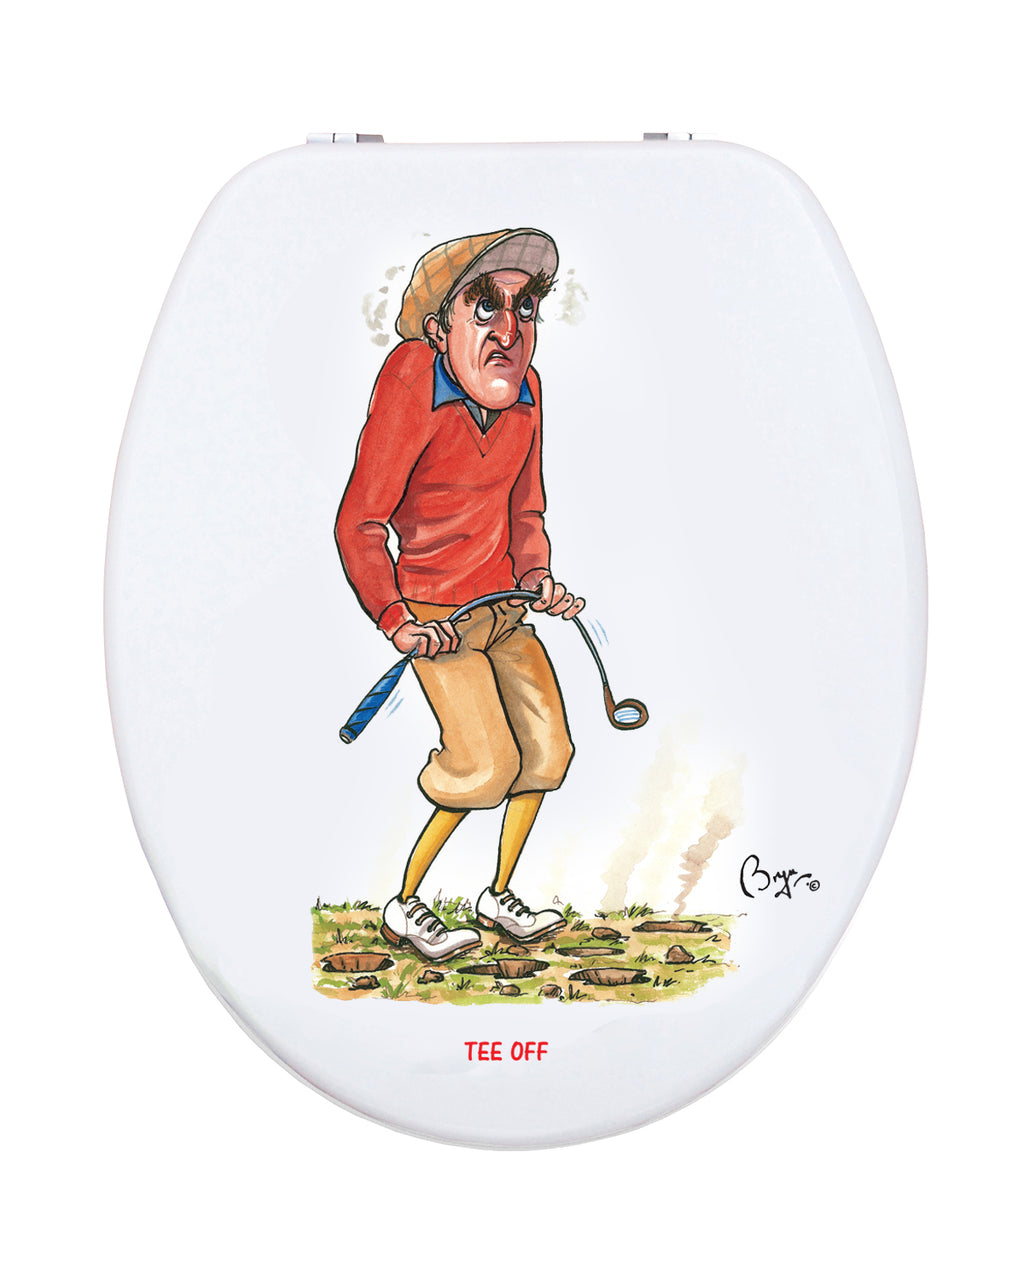 Golf - Bryn Parry- Toilet Seat.